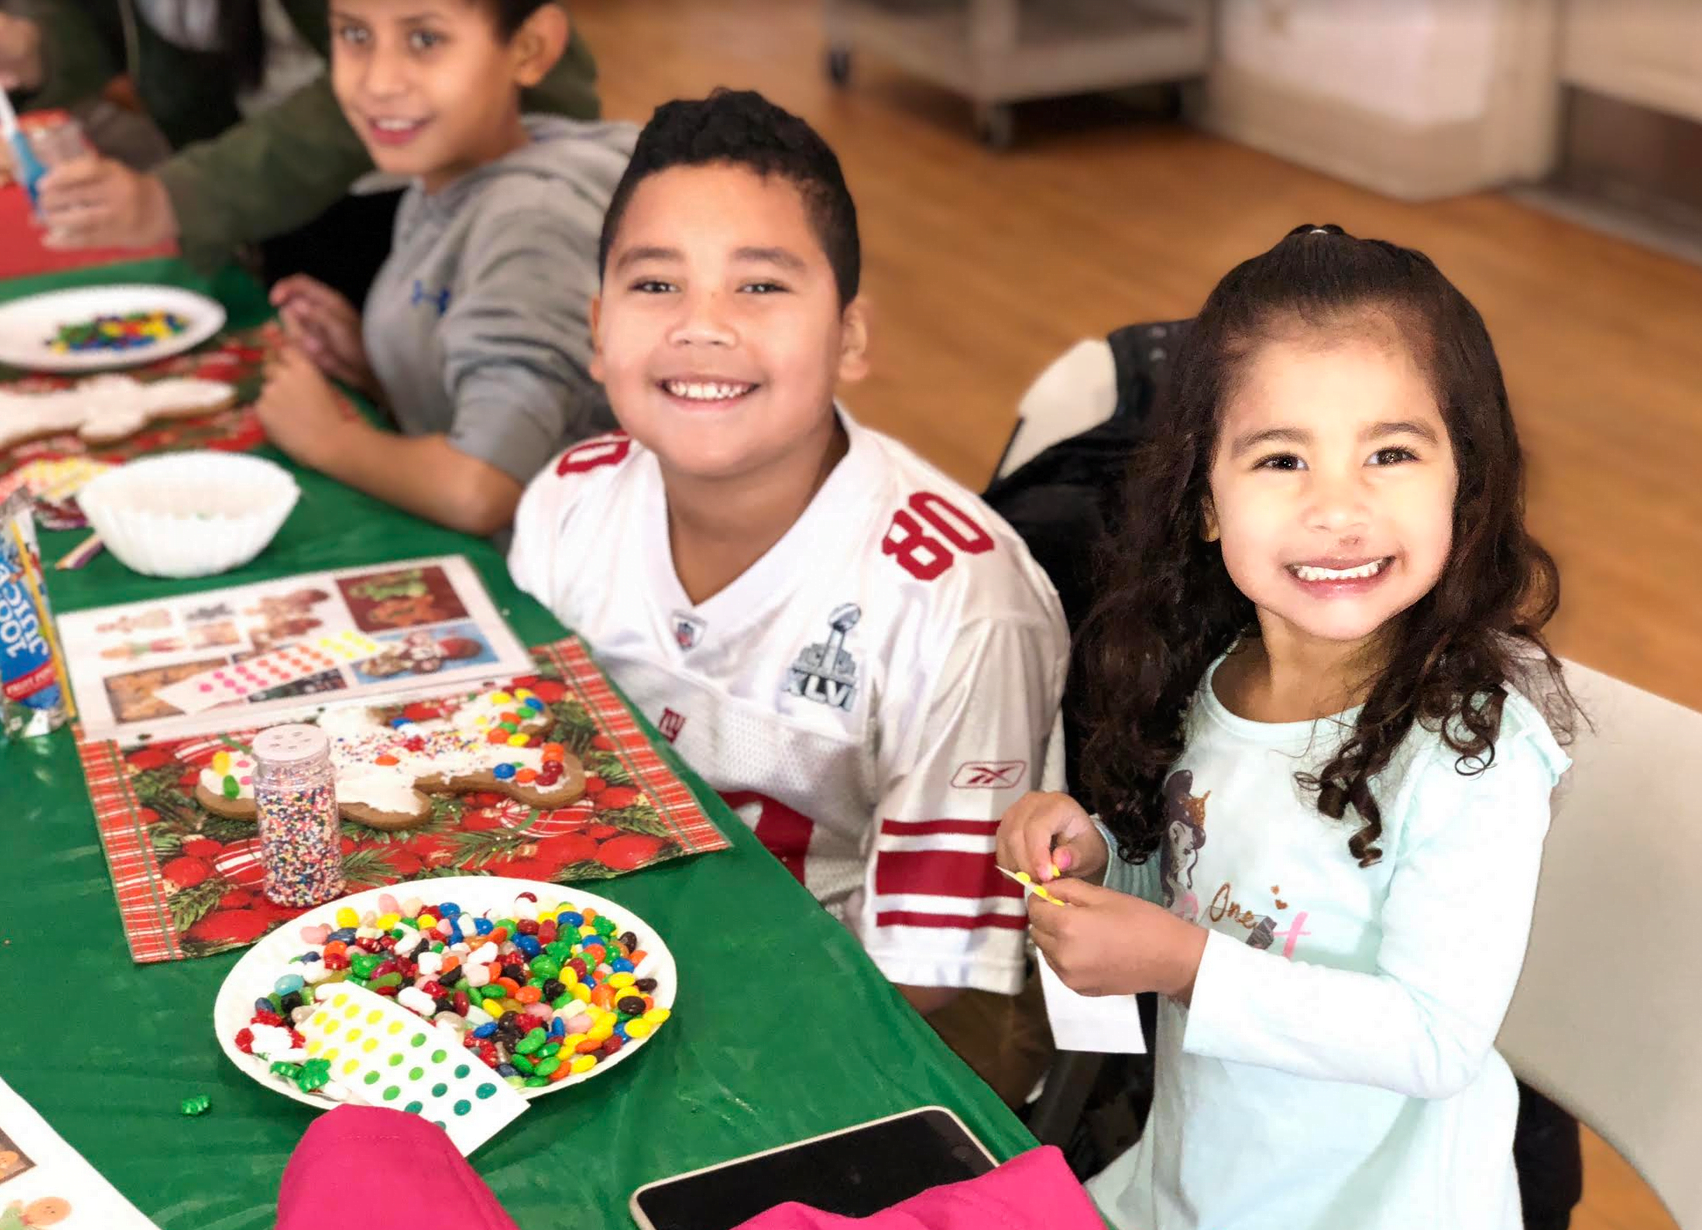 Kids Get in Holiday Spirit with Gingerbread Cookie Workshop Hosted by Junior League of Greenwich at Boys and Girls Club of Greenwich